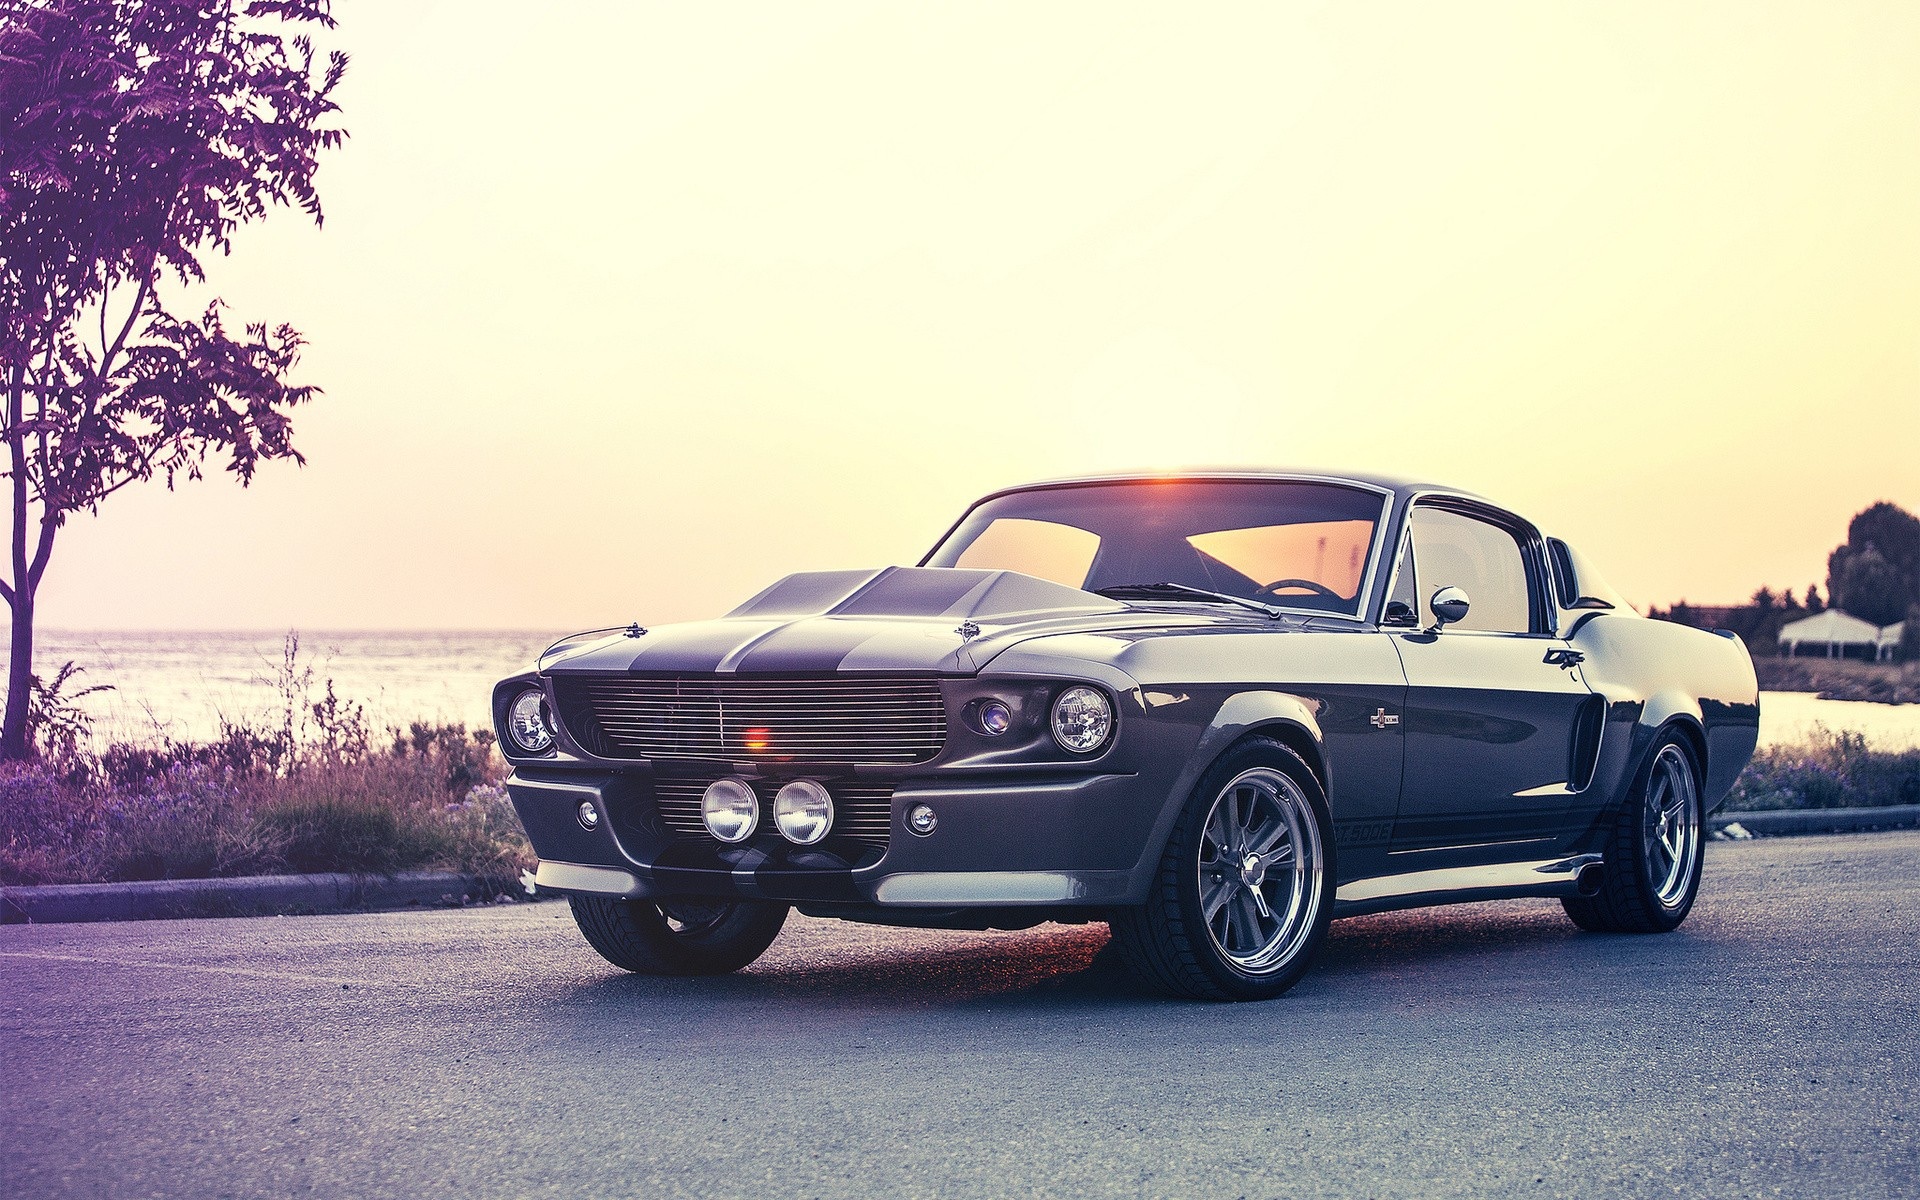 Download wallpaper 1280x2120 front, ford mustang, muscle car, iphone 6  plus, 1280x2120 hd background, 7547